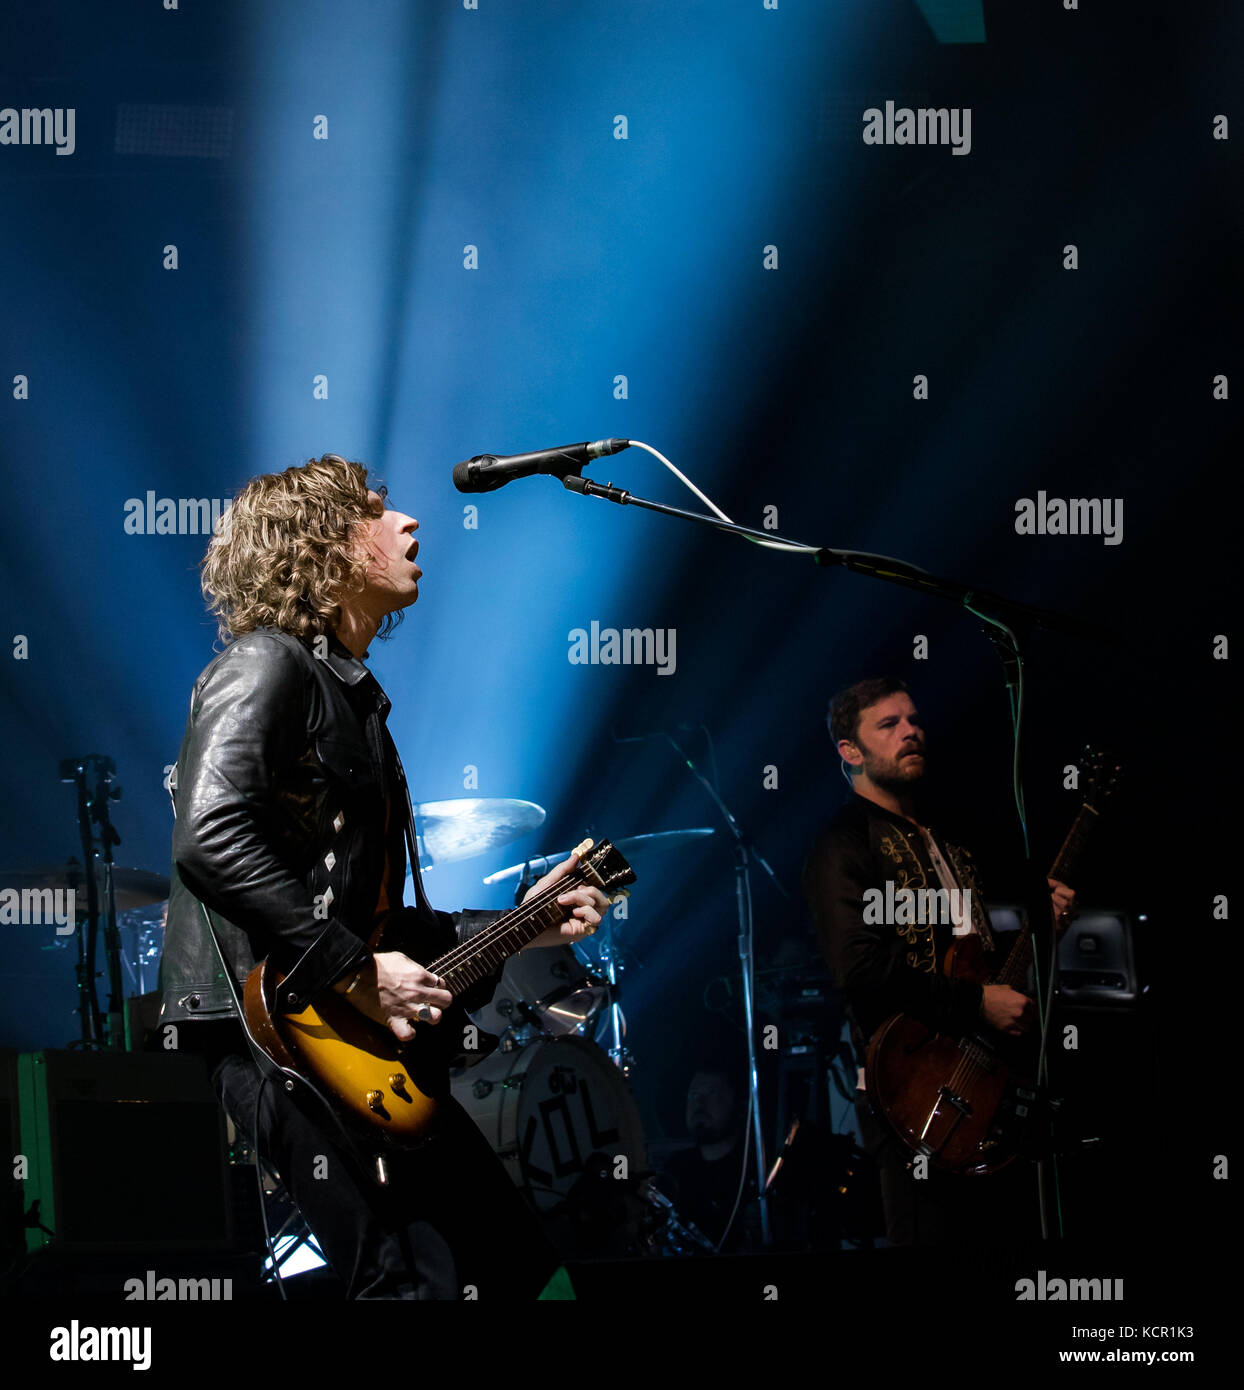 Las Vegas, NV, USA. 6th Oct, 2017. ***HOUSE COVERAGE*** Kings Of Leon perform and donate net-proceeds to help victims of the Las Vegas Tradgedy at The Joint at Hard Rock Hotel & Casino on October 6, 2017. Credit: Erik Kabik Photography/Media Punch/Alamy Live News Stock Photo